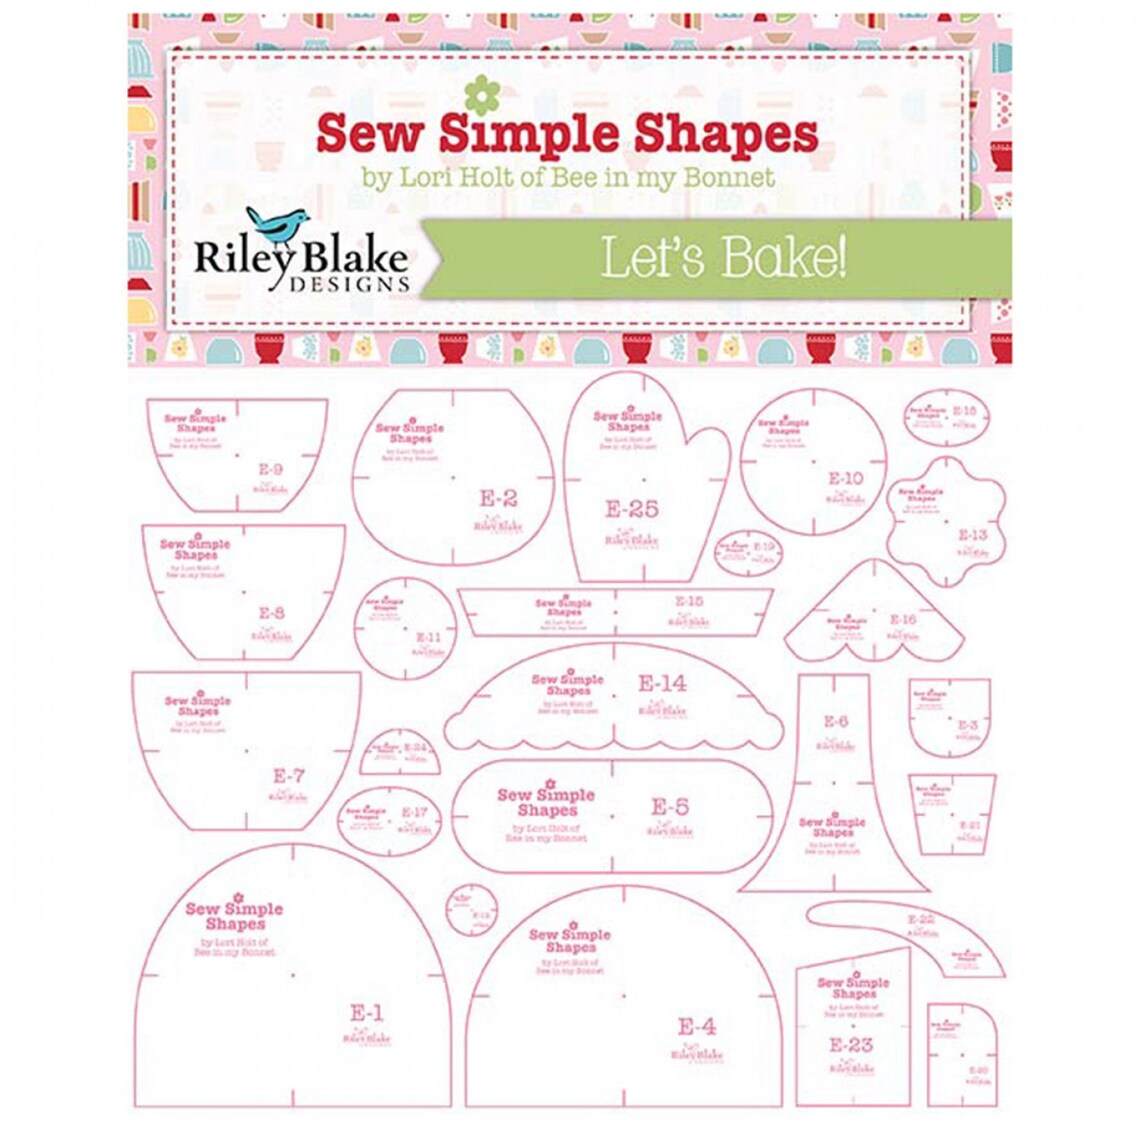 Let's Bake - Sew Simple Shapes